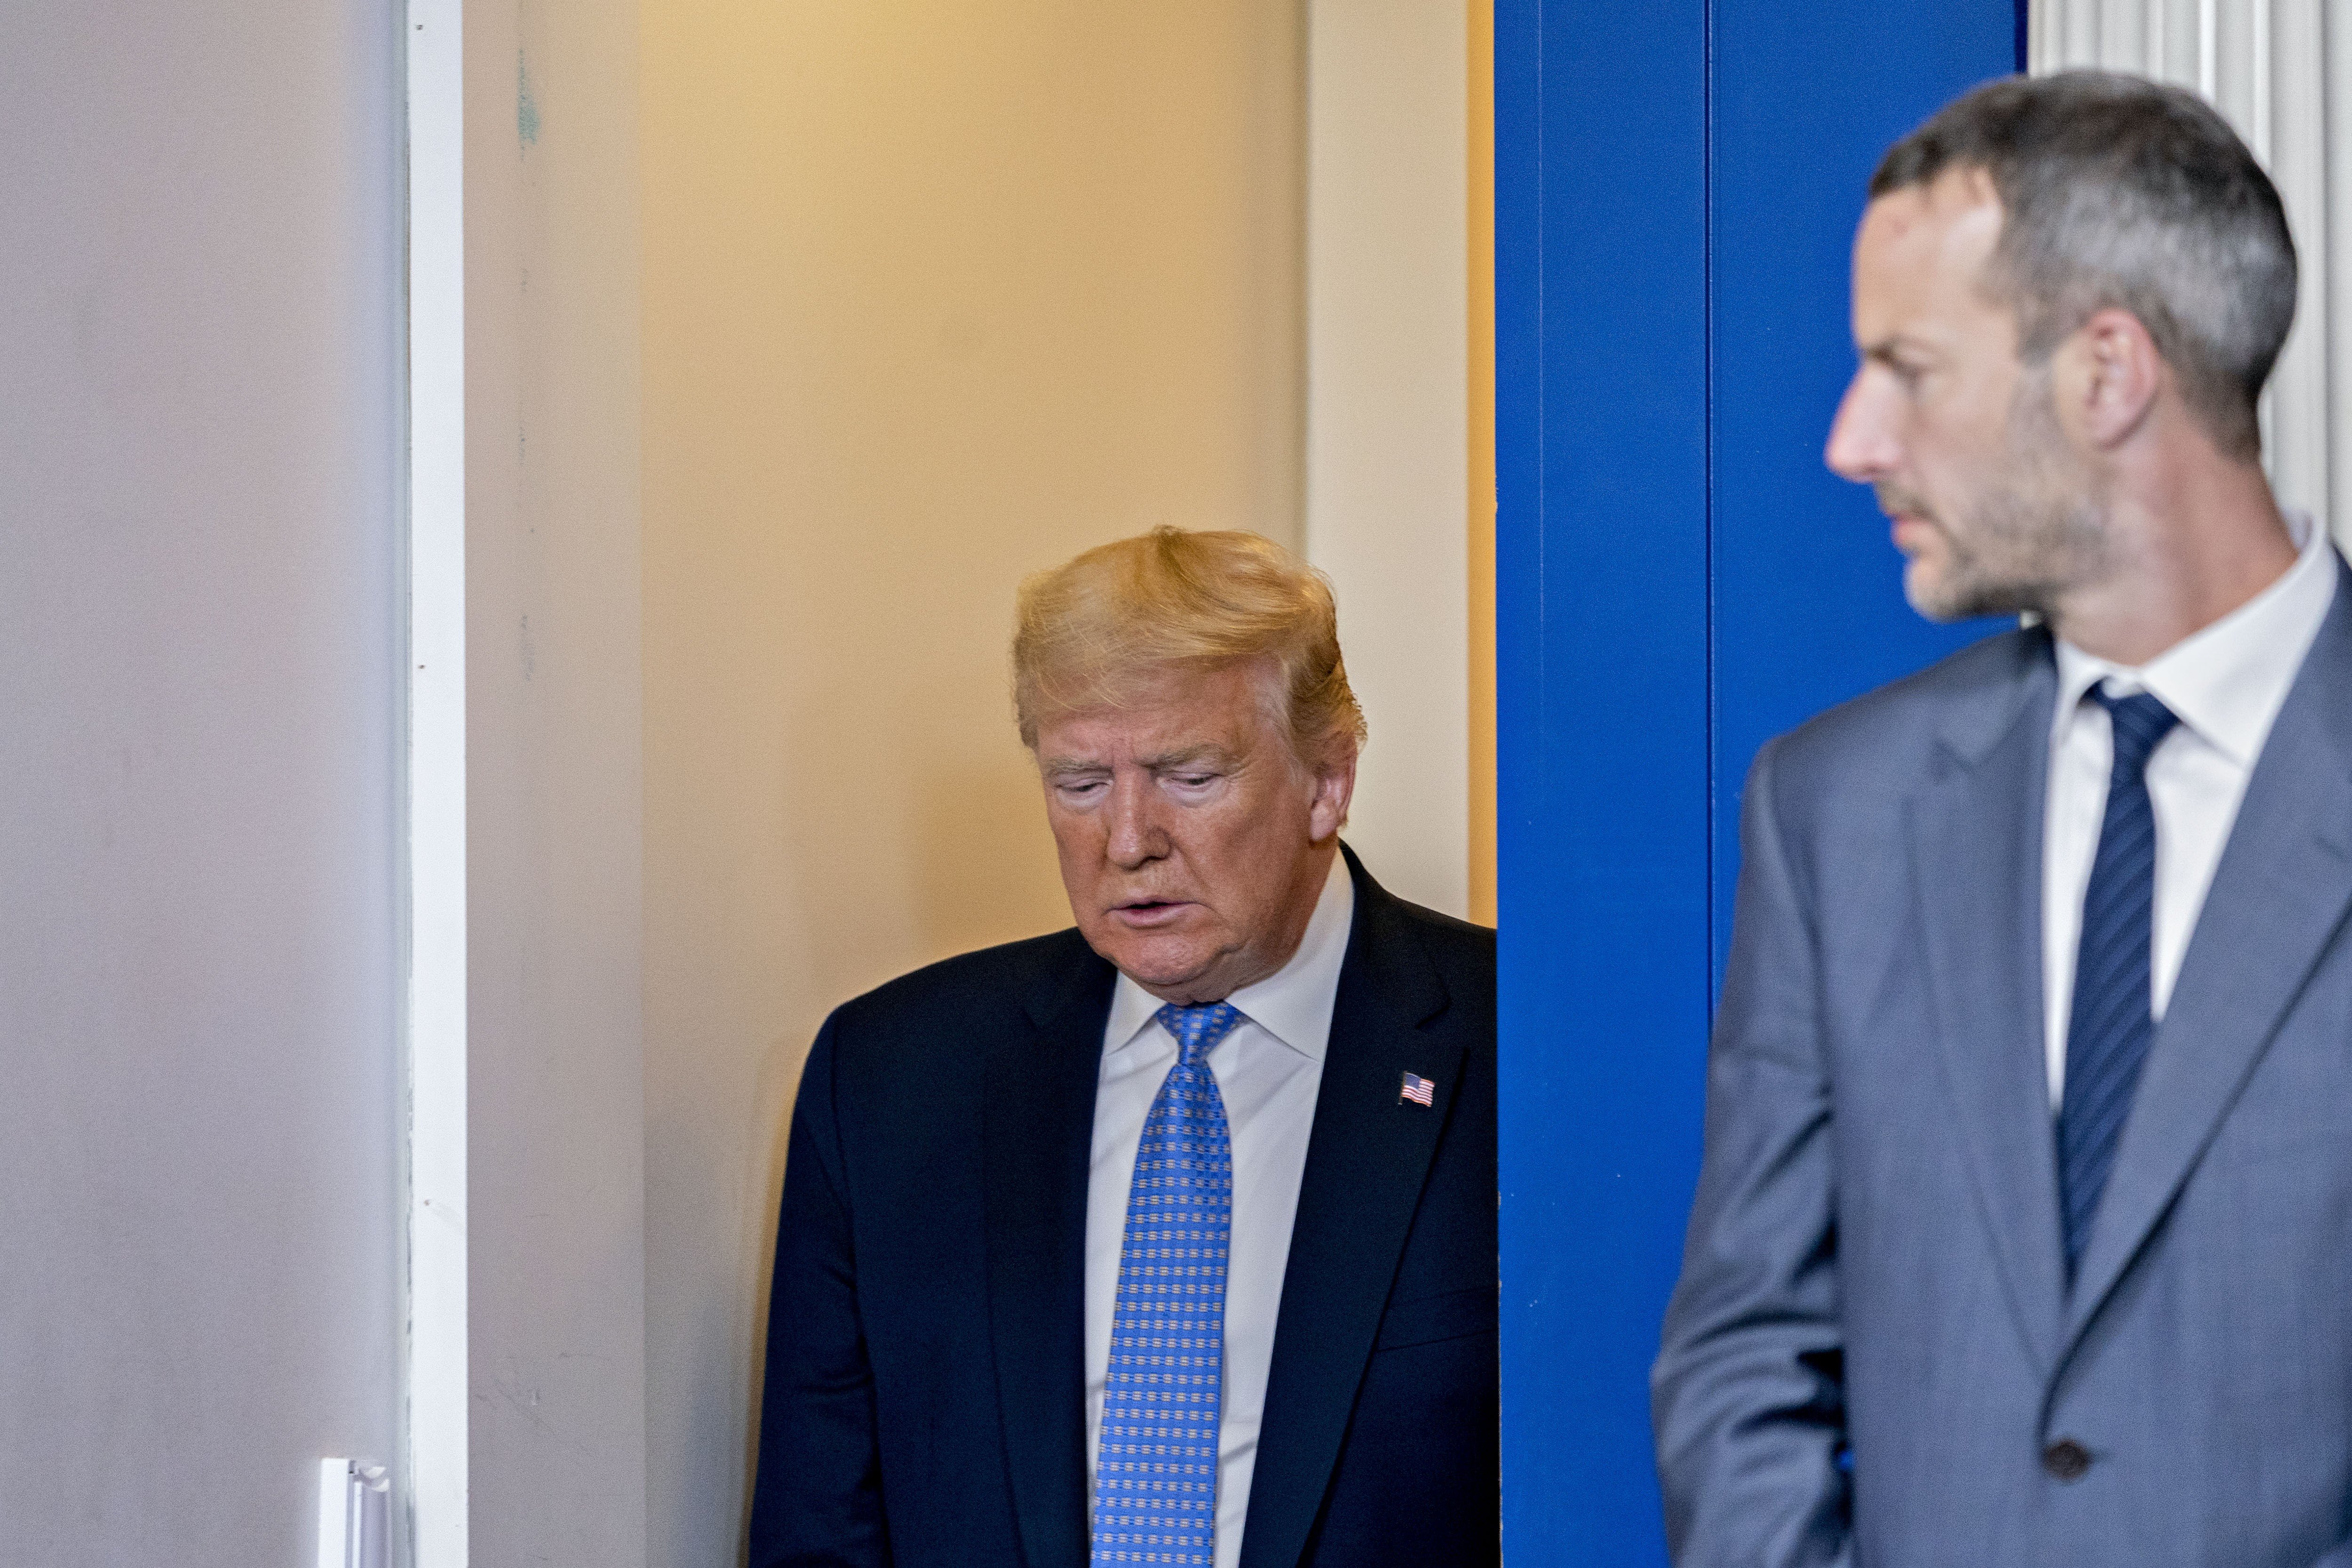 US President Donald Trump arrives at a White House news conference on Sunday. Photo: Bloomberg